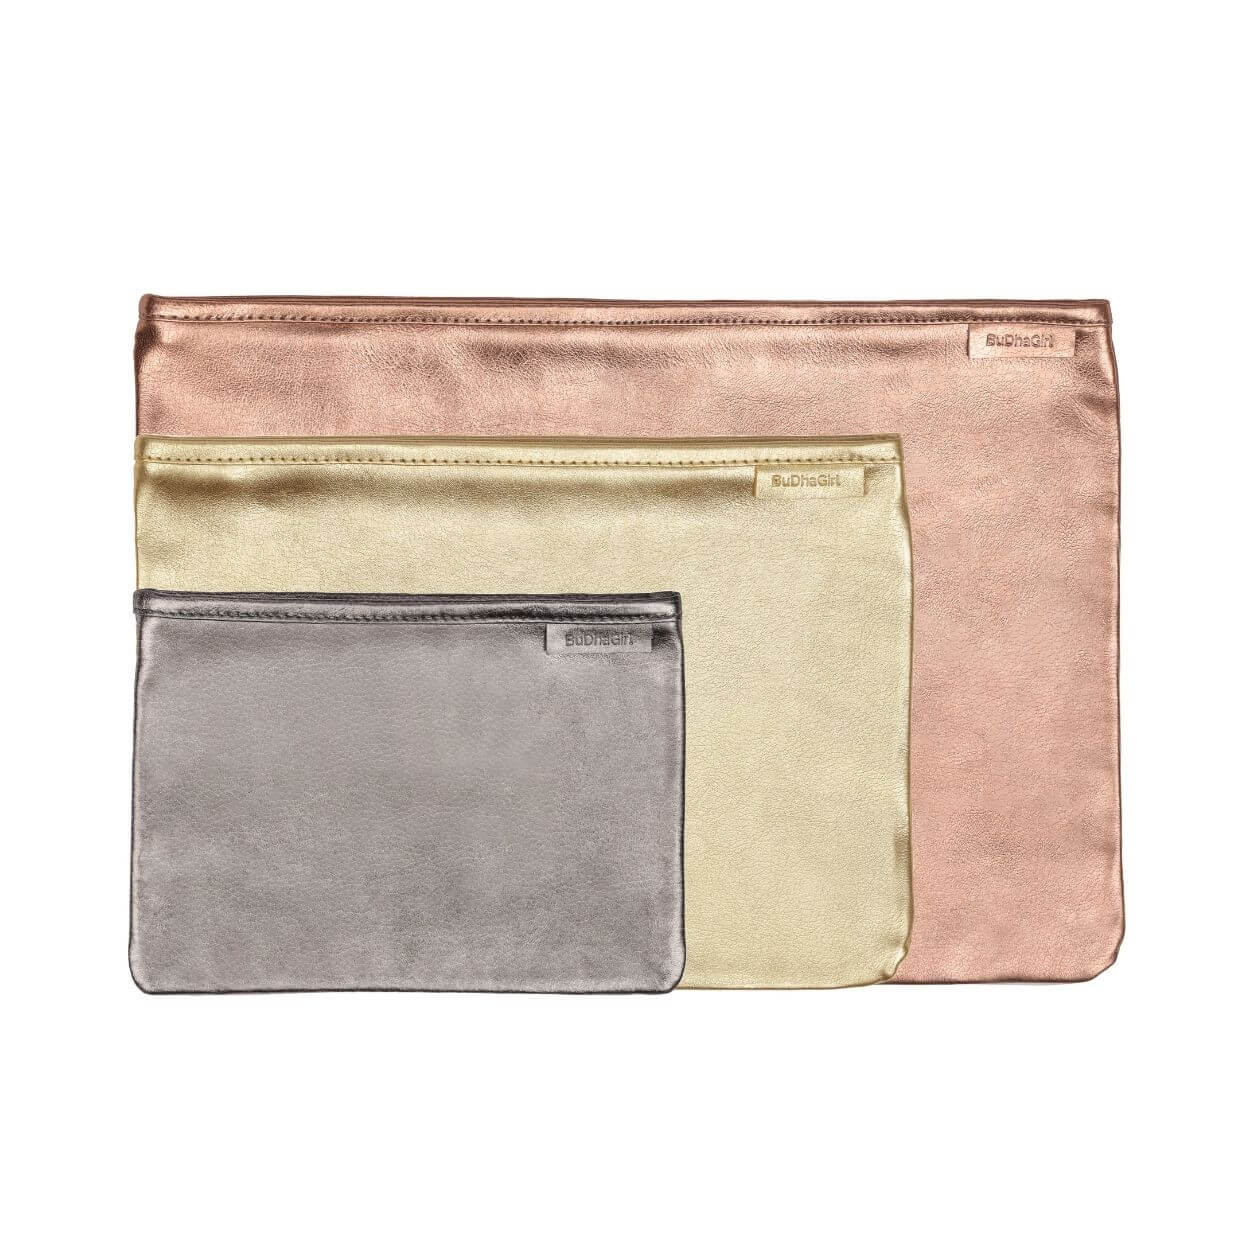 Gold, Silver and Rose Gold Leather Pochette Bag | Clutch Handbag by BuDhaGirl